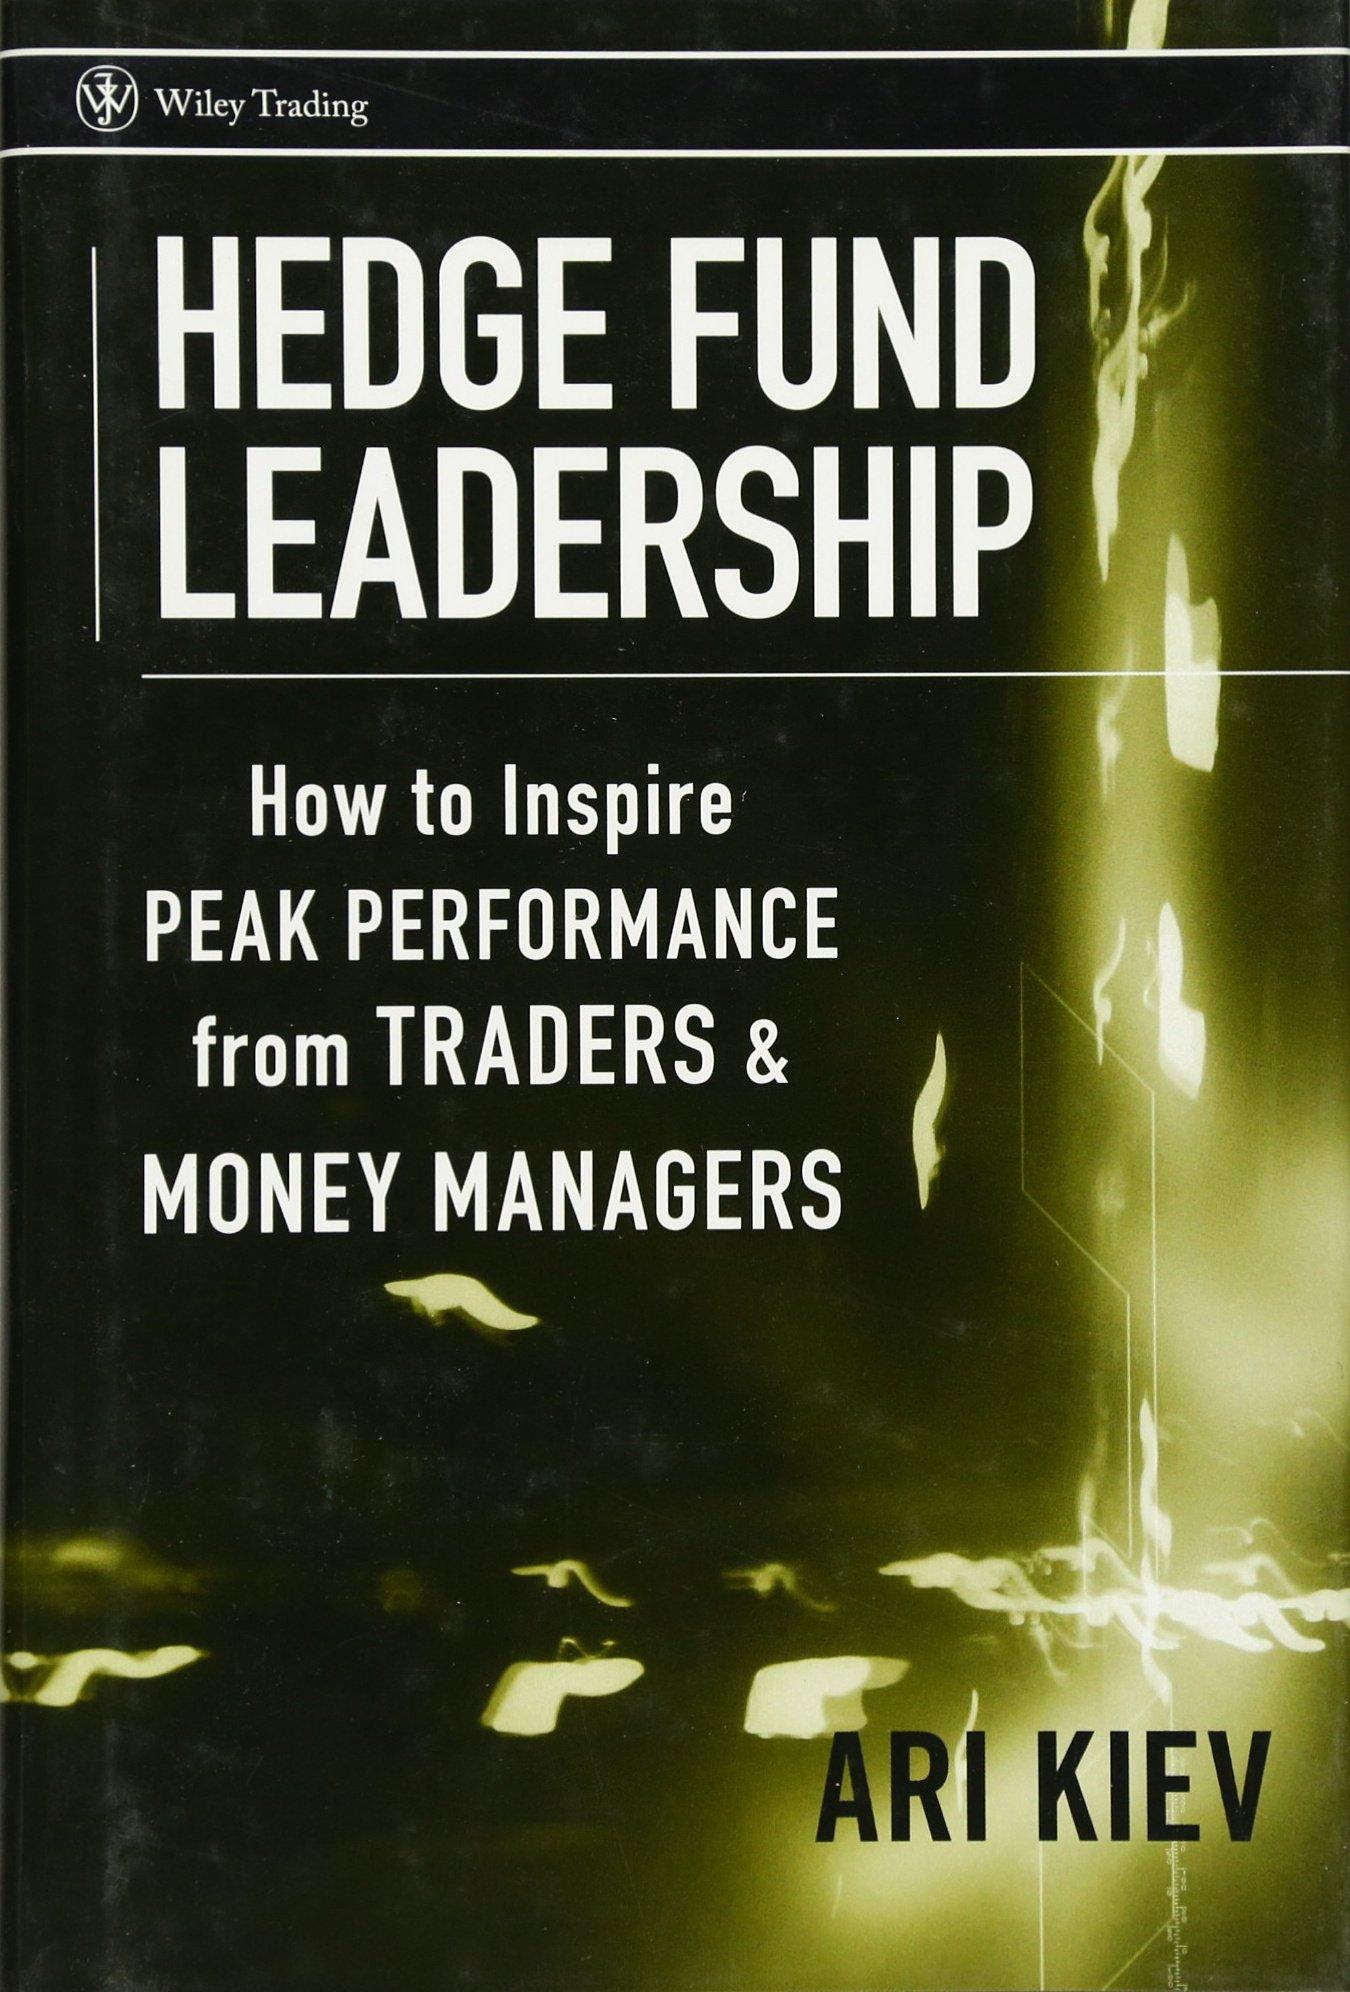 hedge fund leadership how to inspire peak performance from traders and money managers 1st edition ari kiev